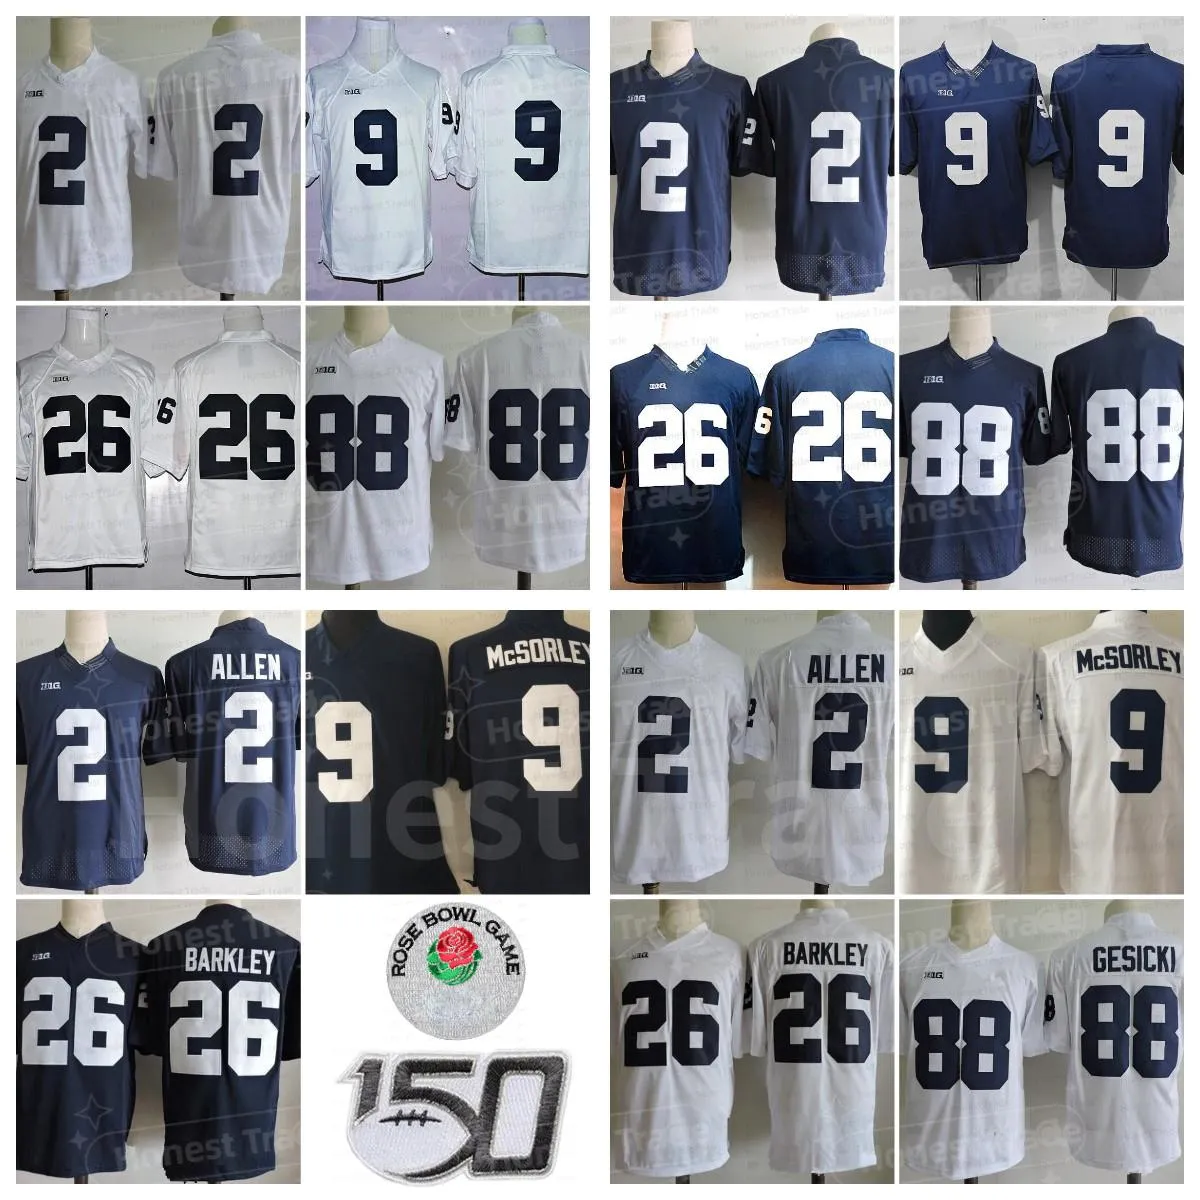 NCAA Penn State College Football #26 Saquon 9 Trace McSorley 88 Mike Gesicki 2 Marcus Allen Paterno Stitched Jerseys White Navy 150th 남자 유니폼